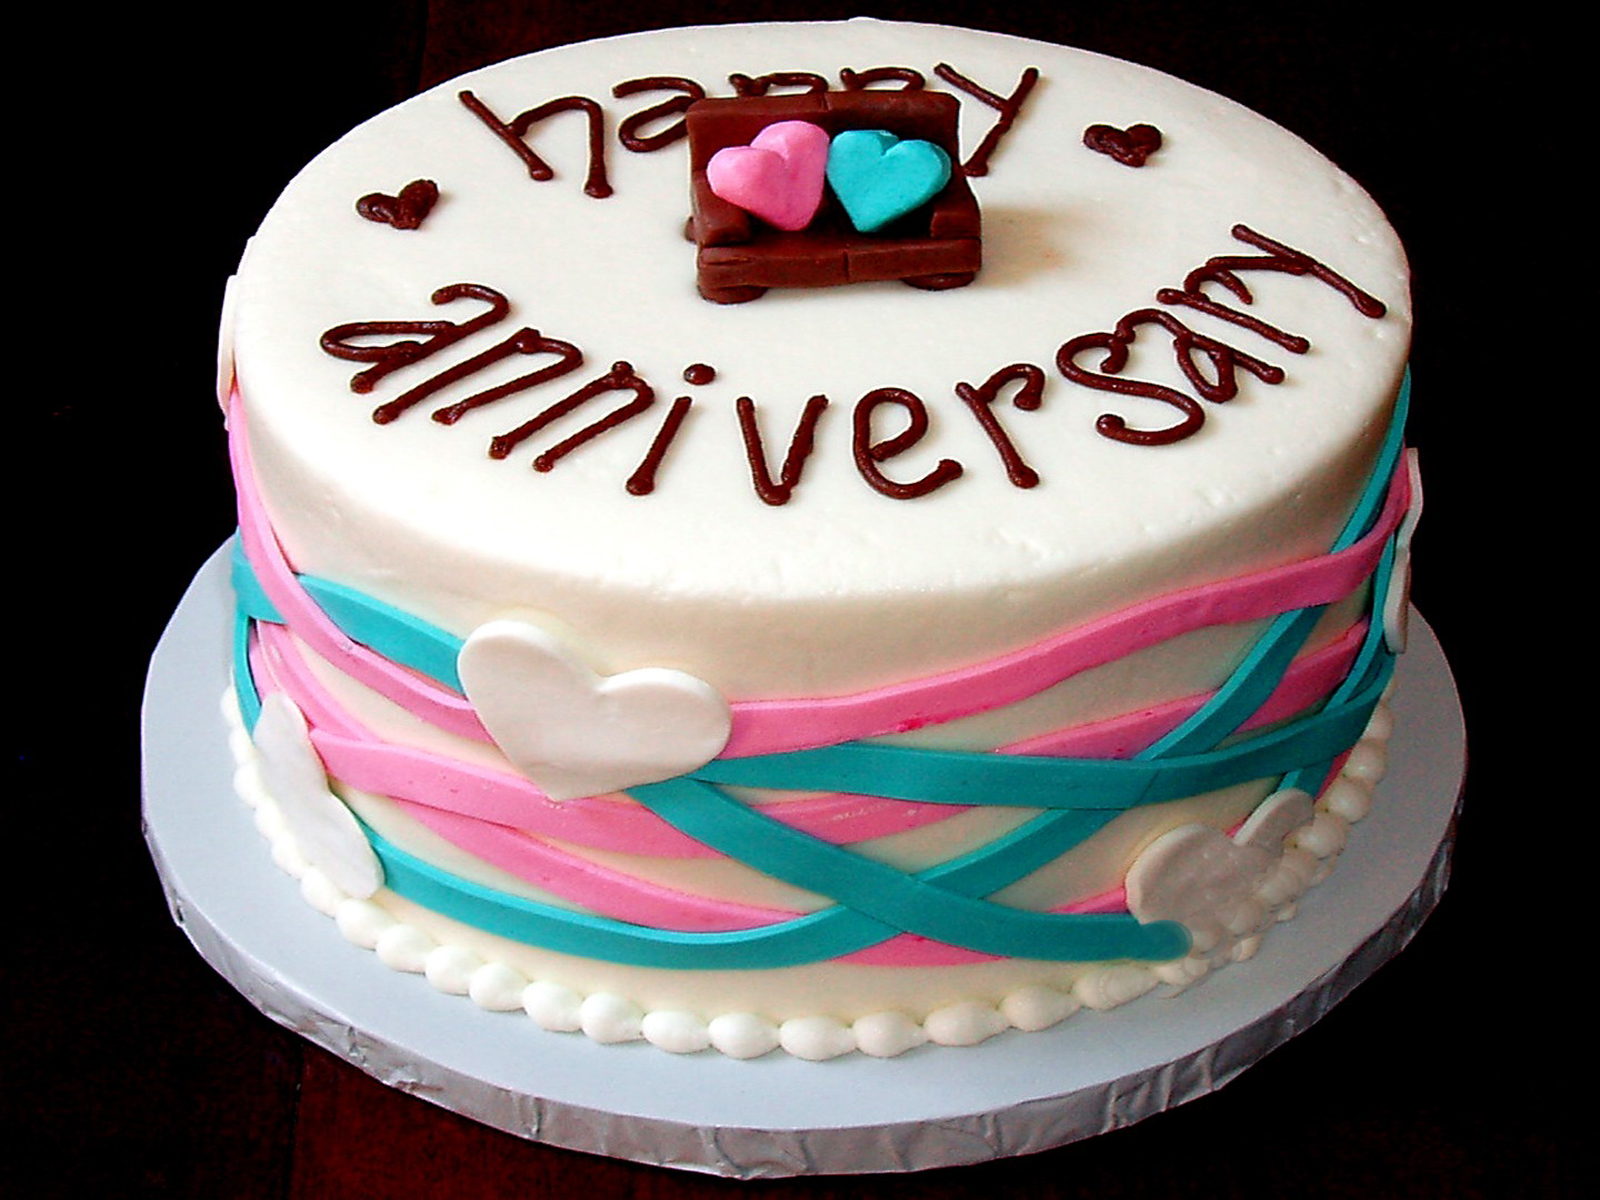 Happy Anniversary Pictures, HD Images free download - Happy Wedding Anniver...